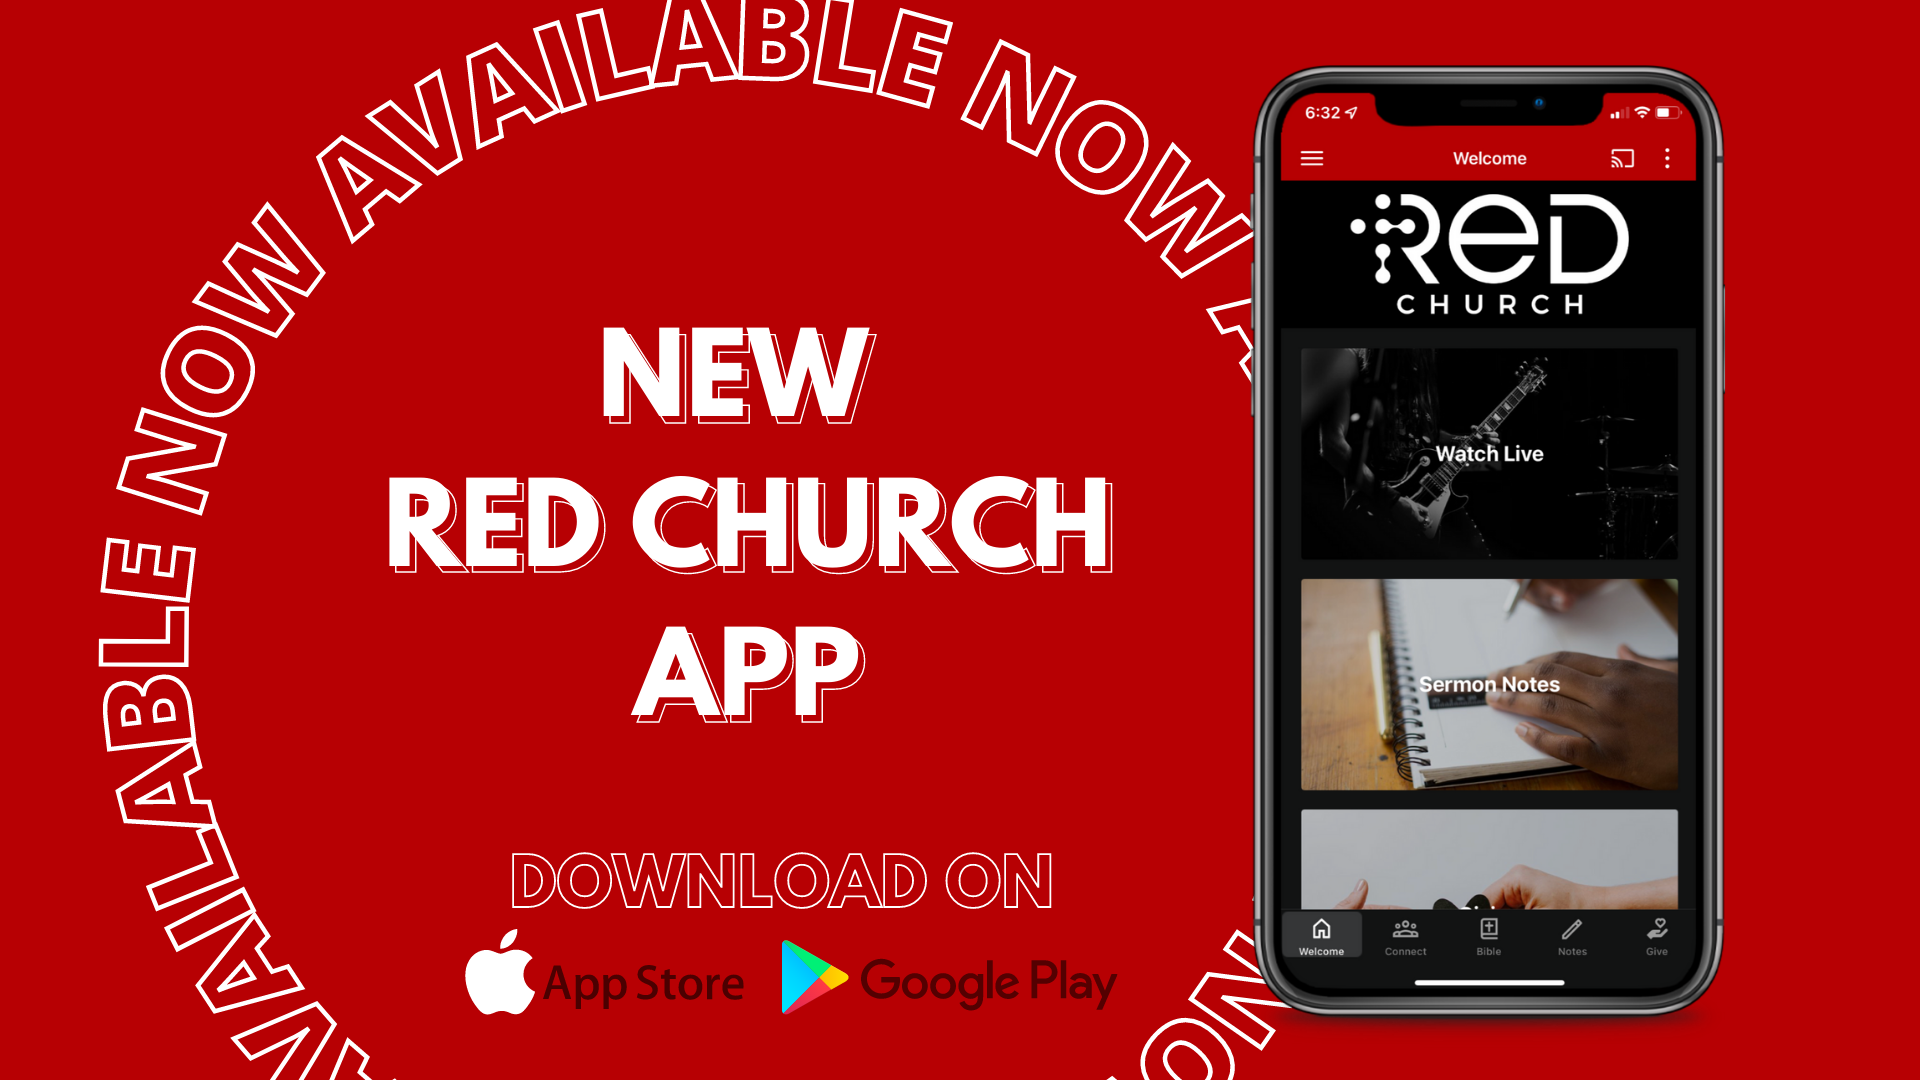 NEW+RED+CHURCH+APP+COMING+SOON.png